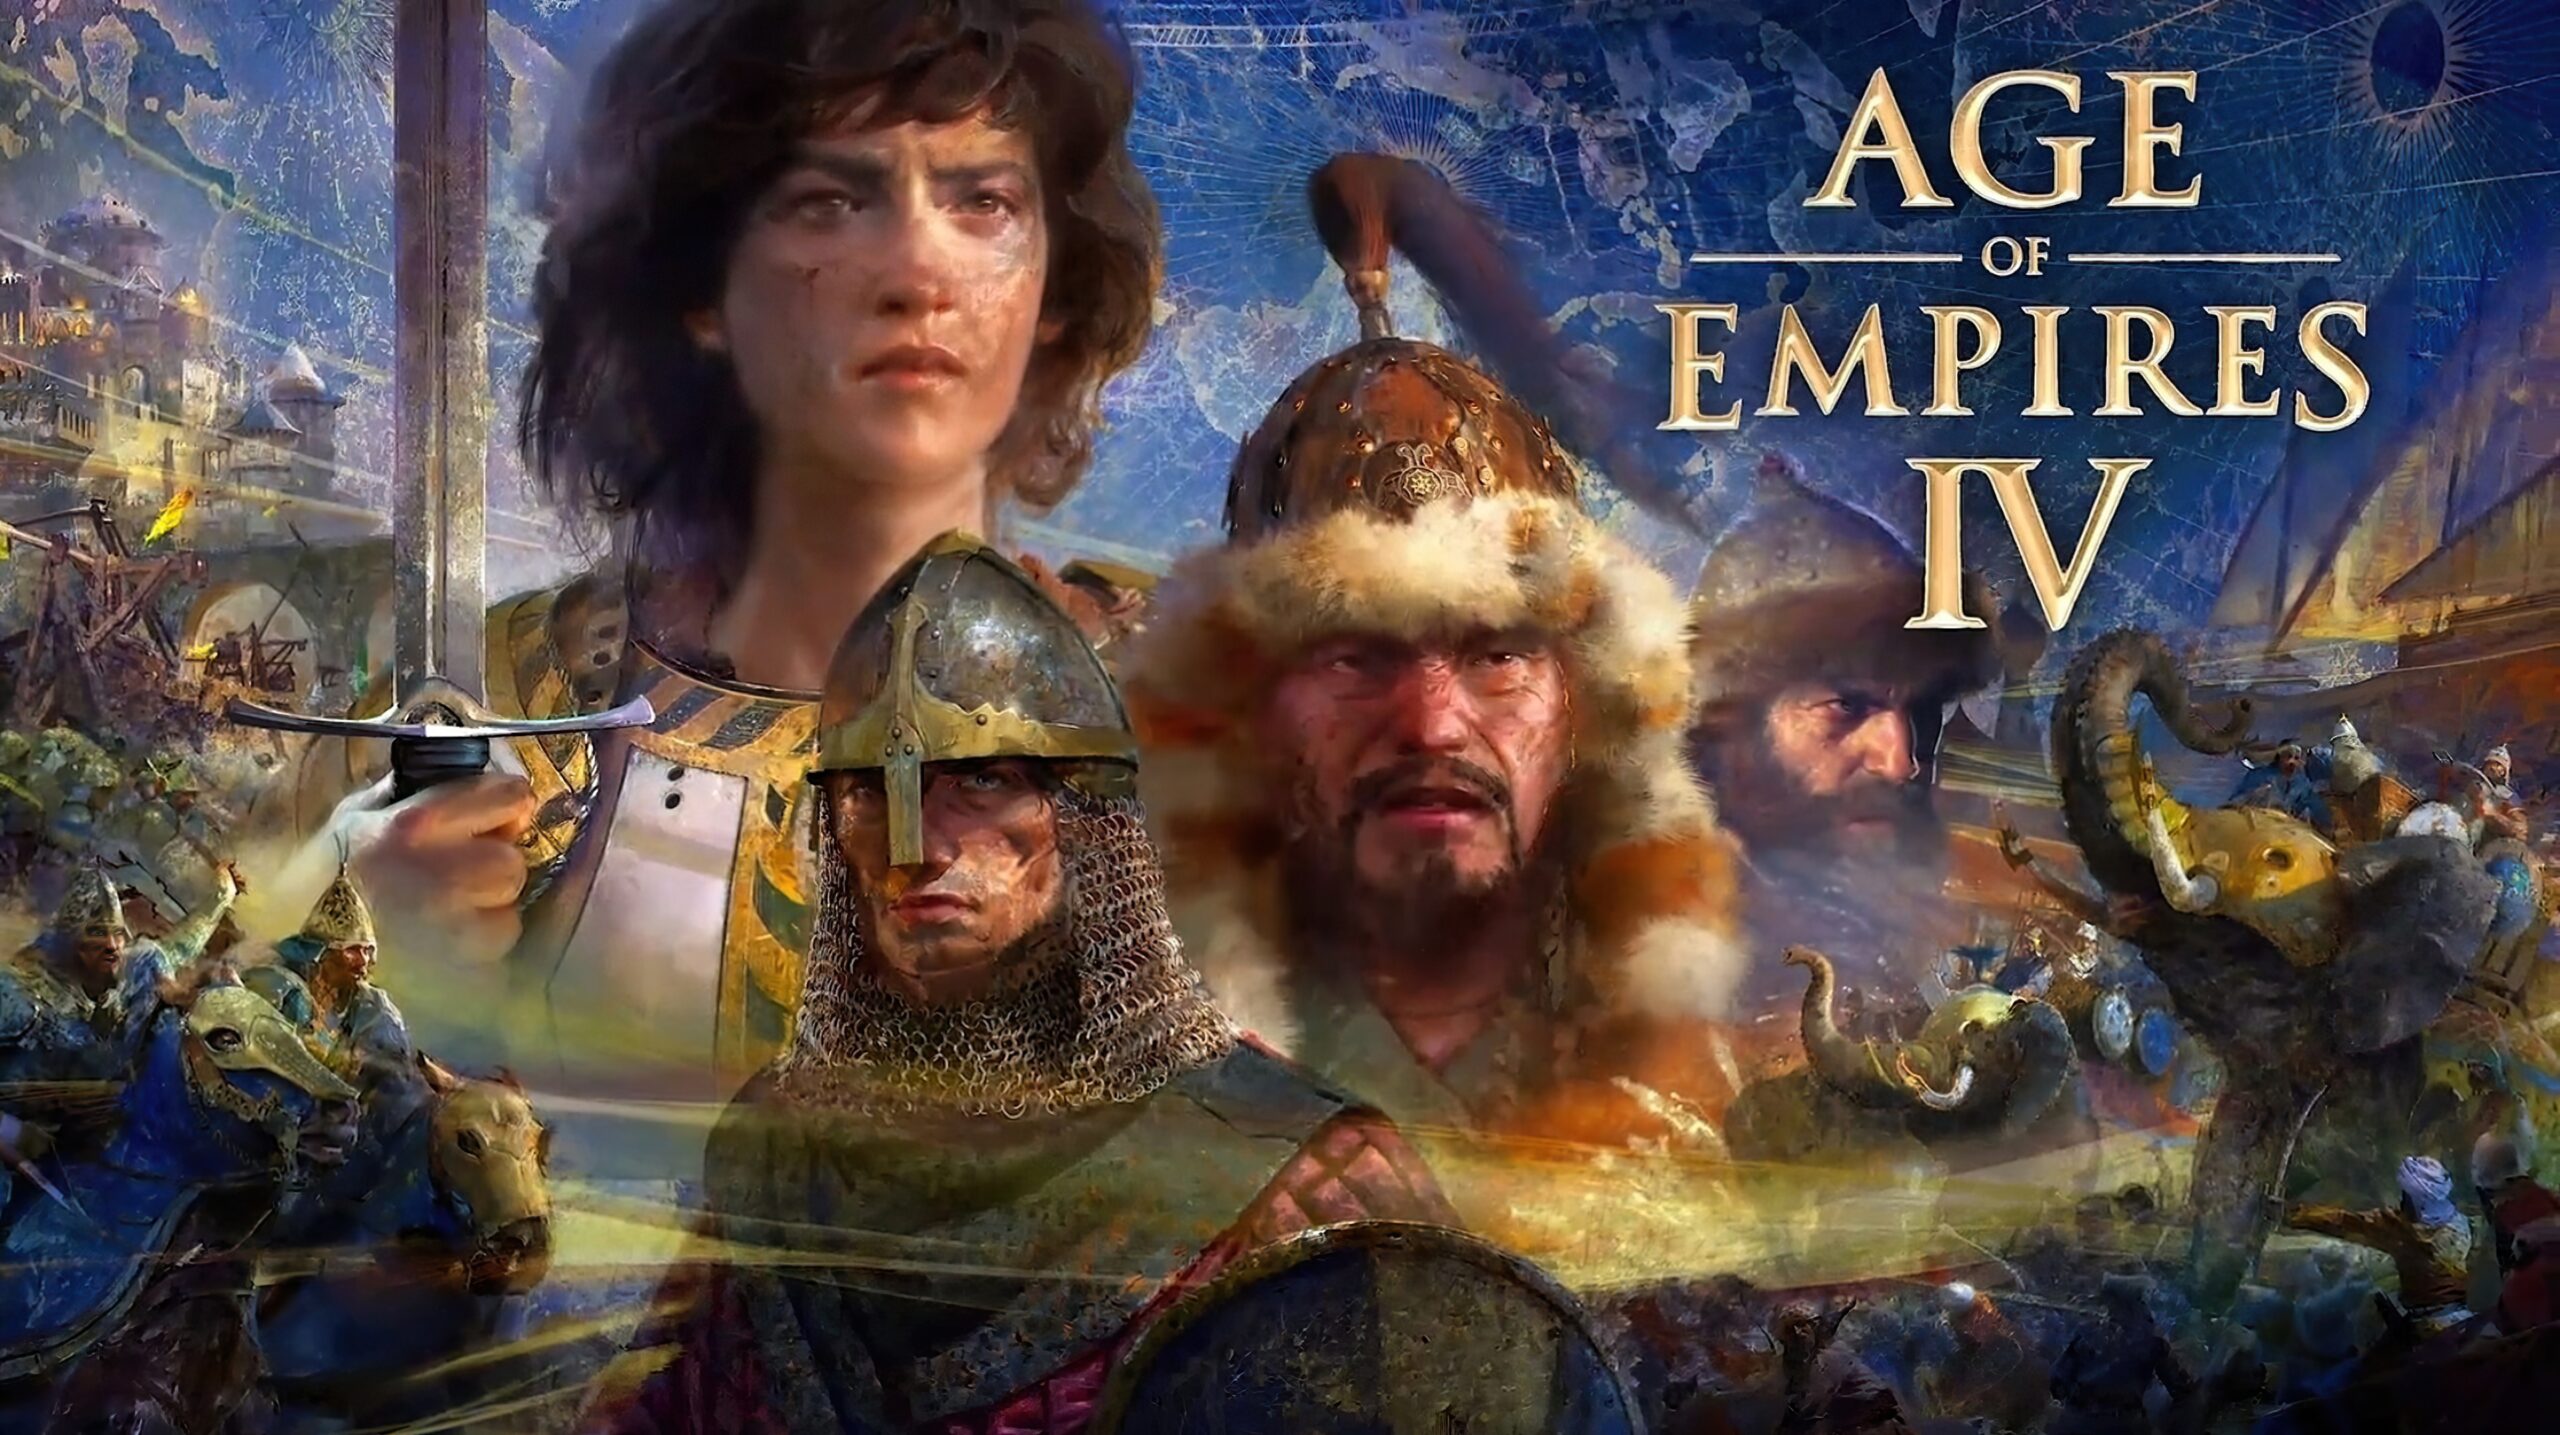 Under Opening Night Live, Age of Empires IV: Anniversary Edition